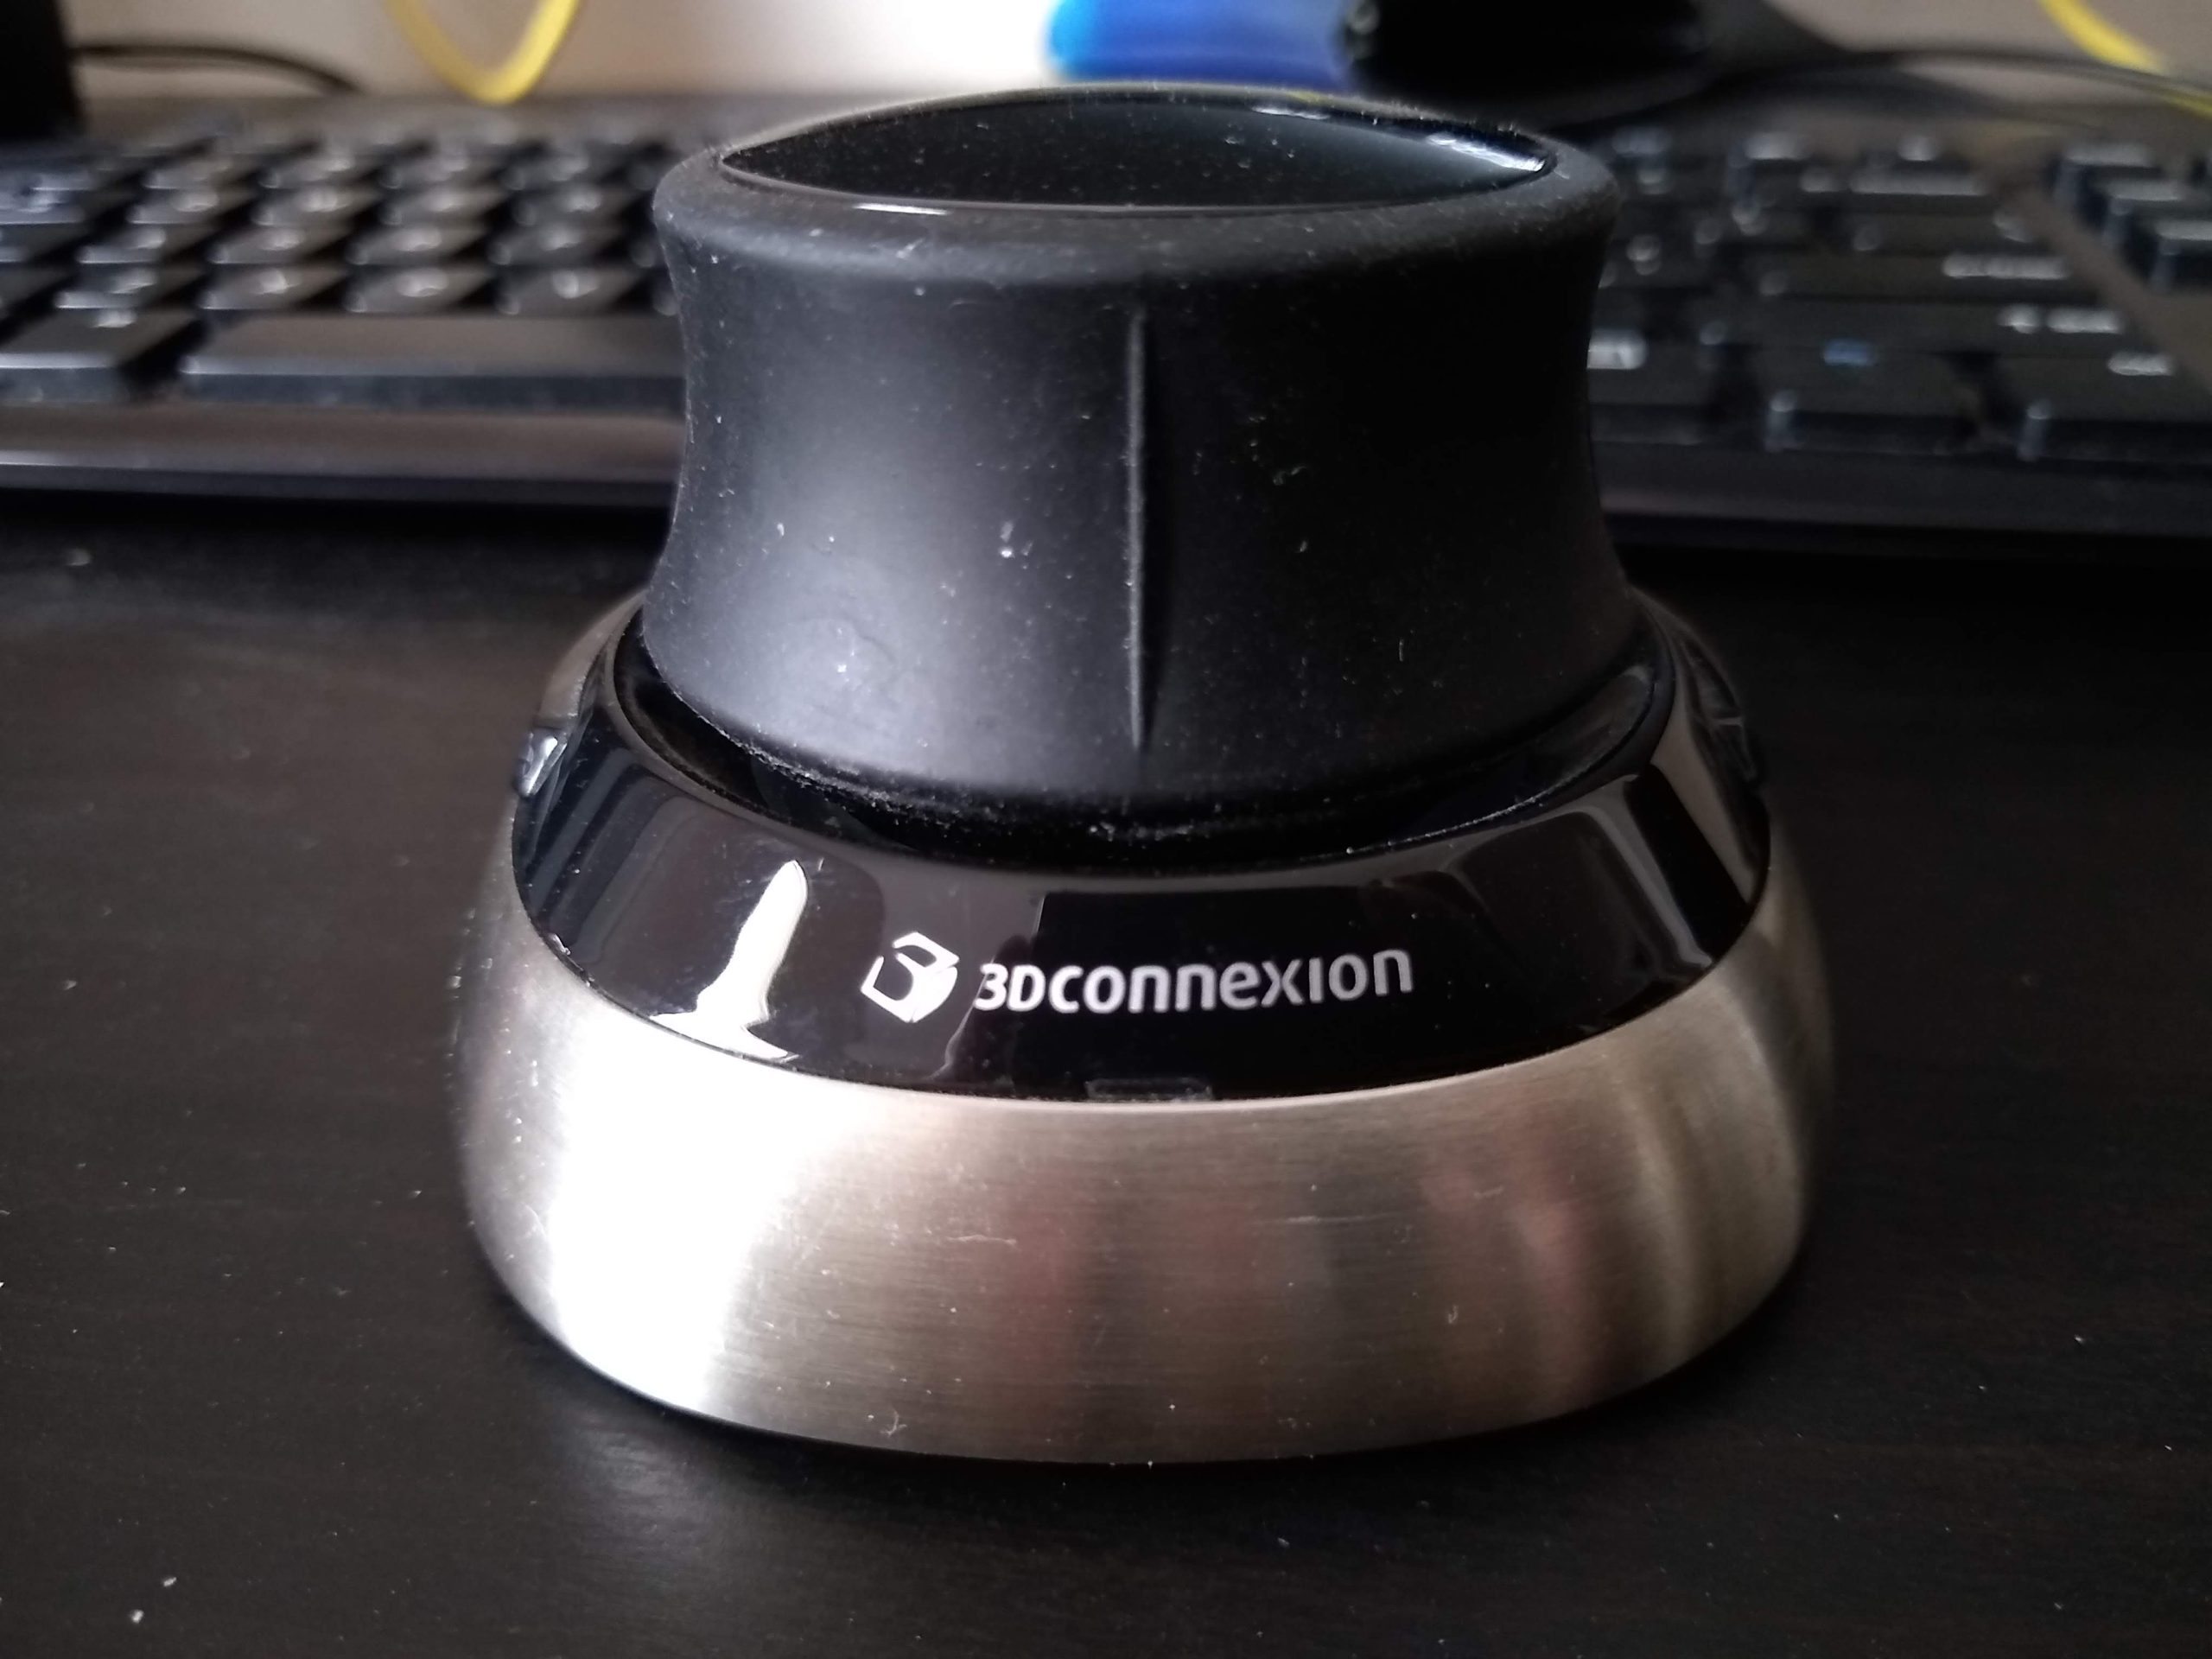 Using 3DConnexion Spacemouse with Linux